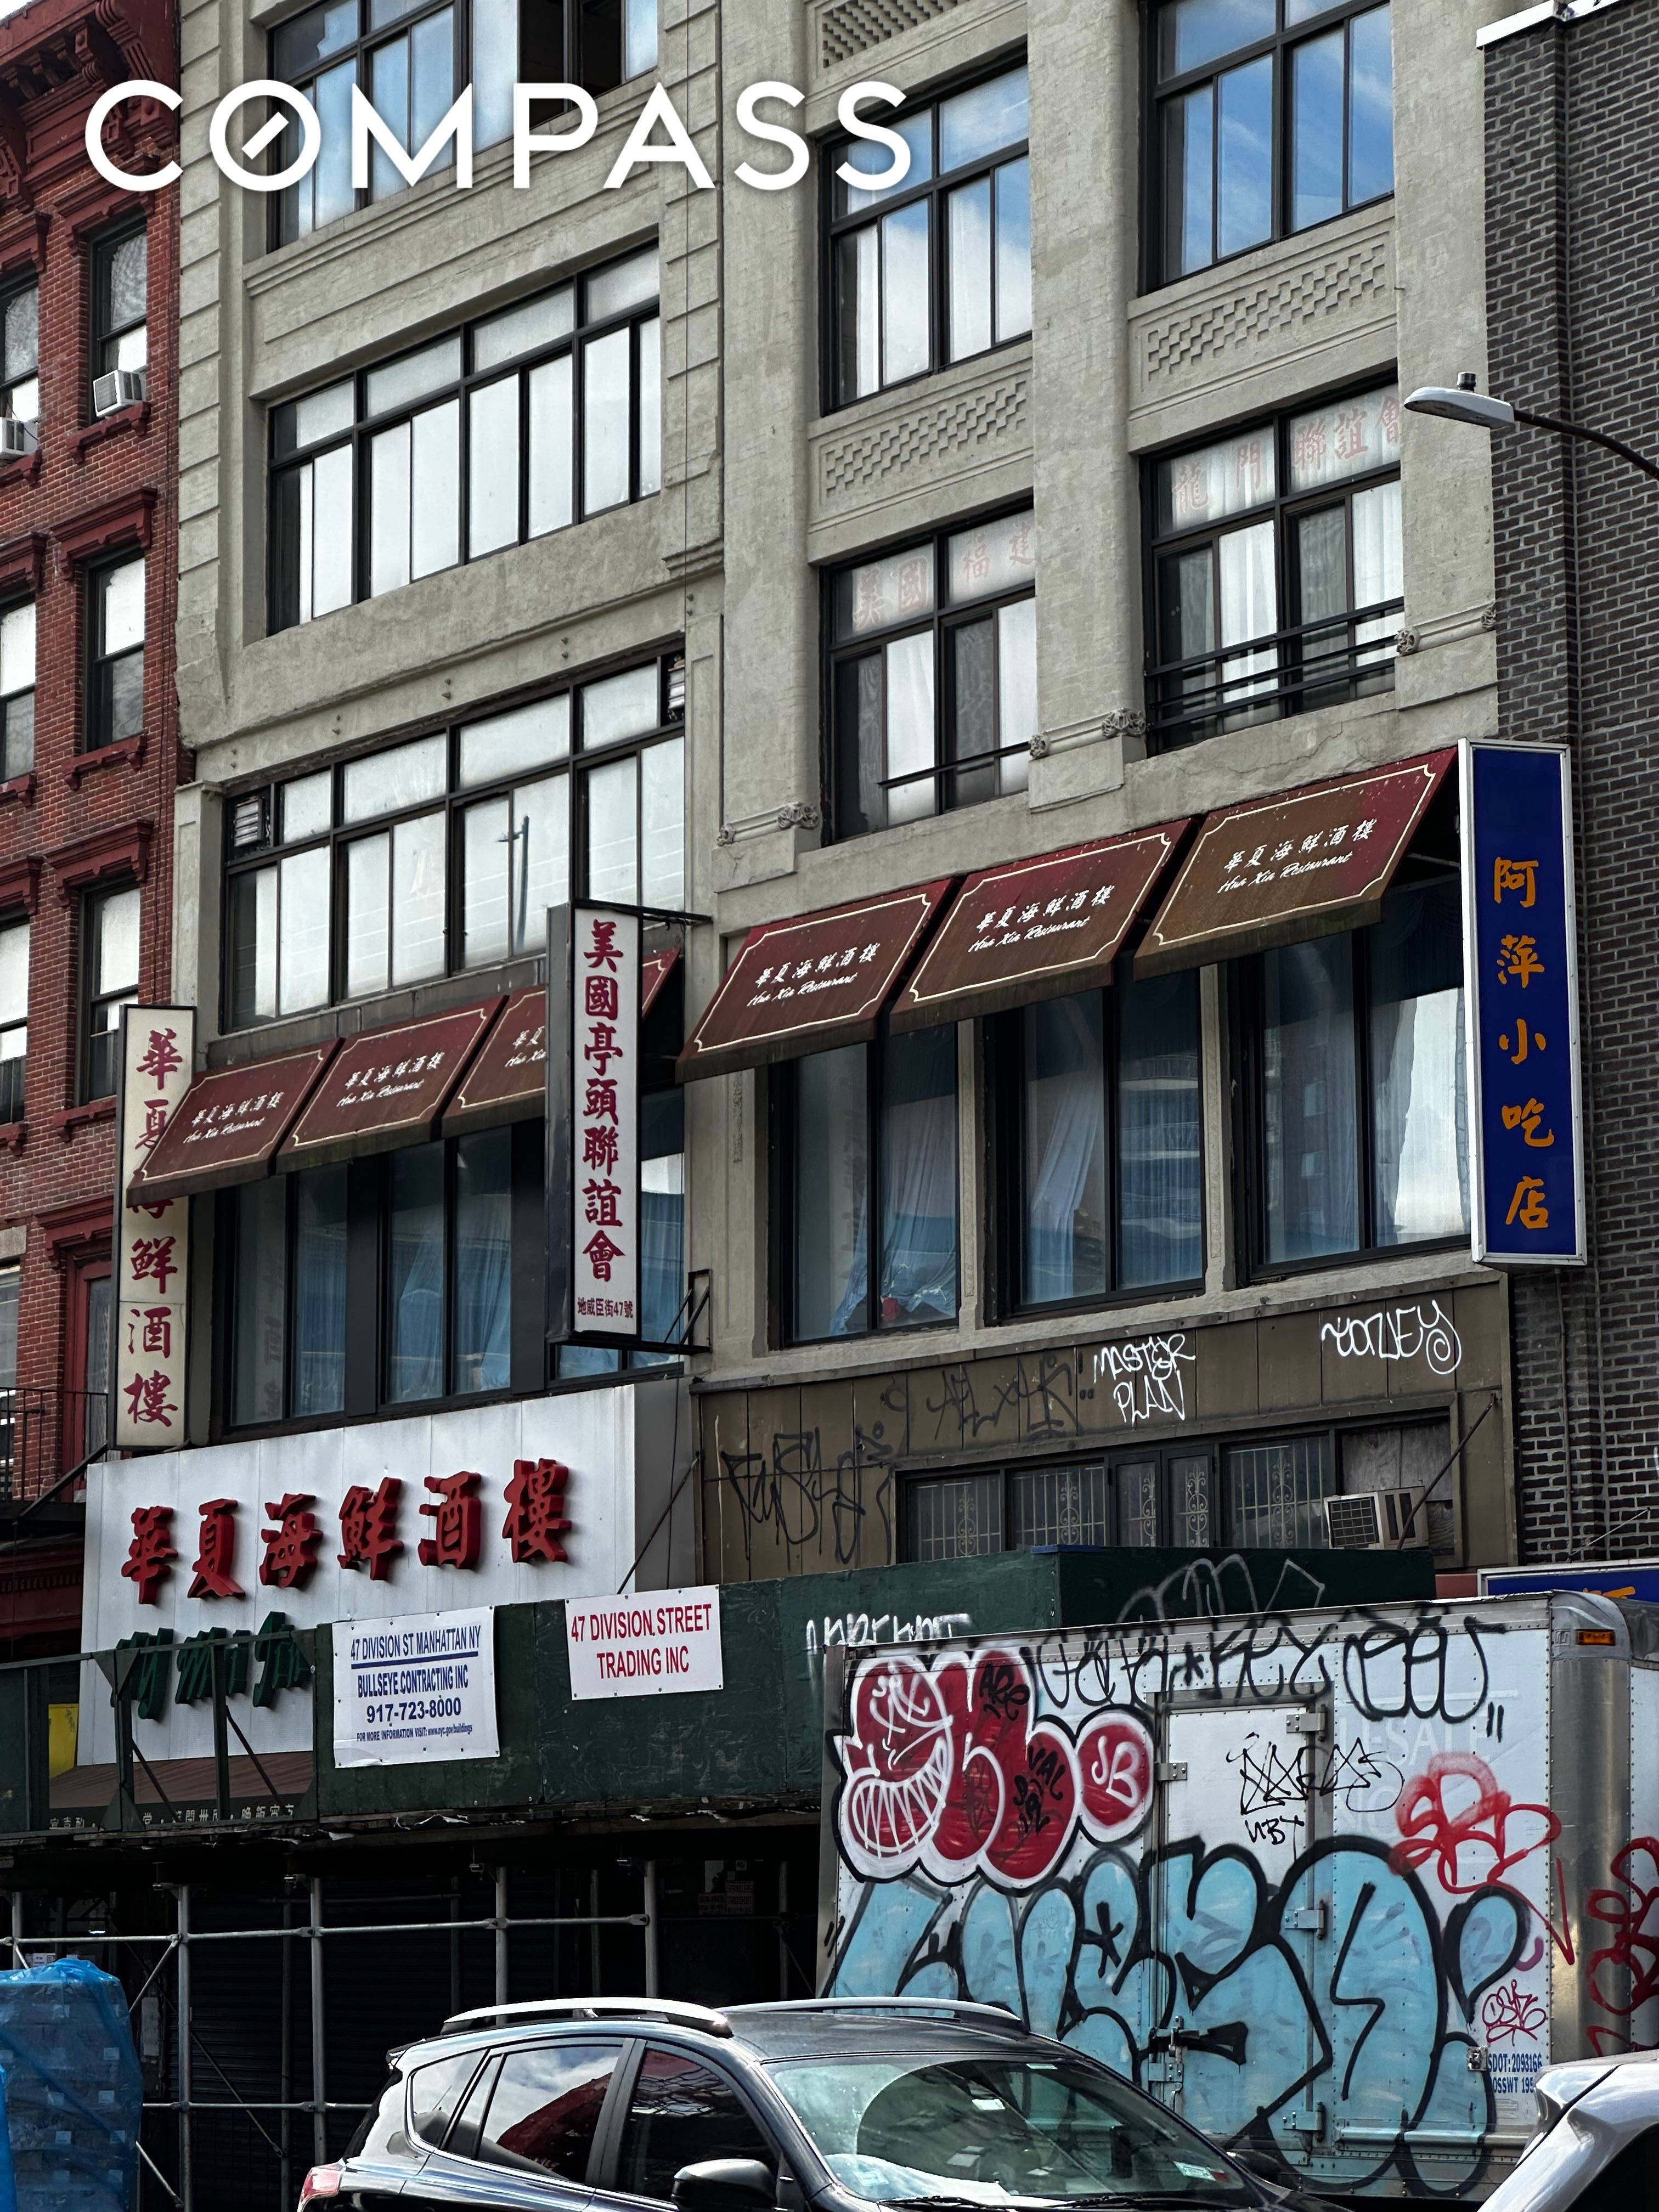 This iconic building can be seen from the Brooklyn bound side of the Manhattan Bridge Located in Business Improvement District Chinatown Partnership 47 49 Division Street 2 tax lots Between ...